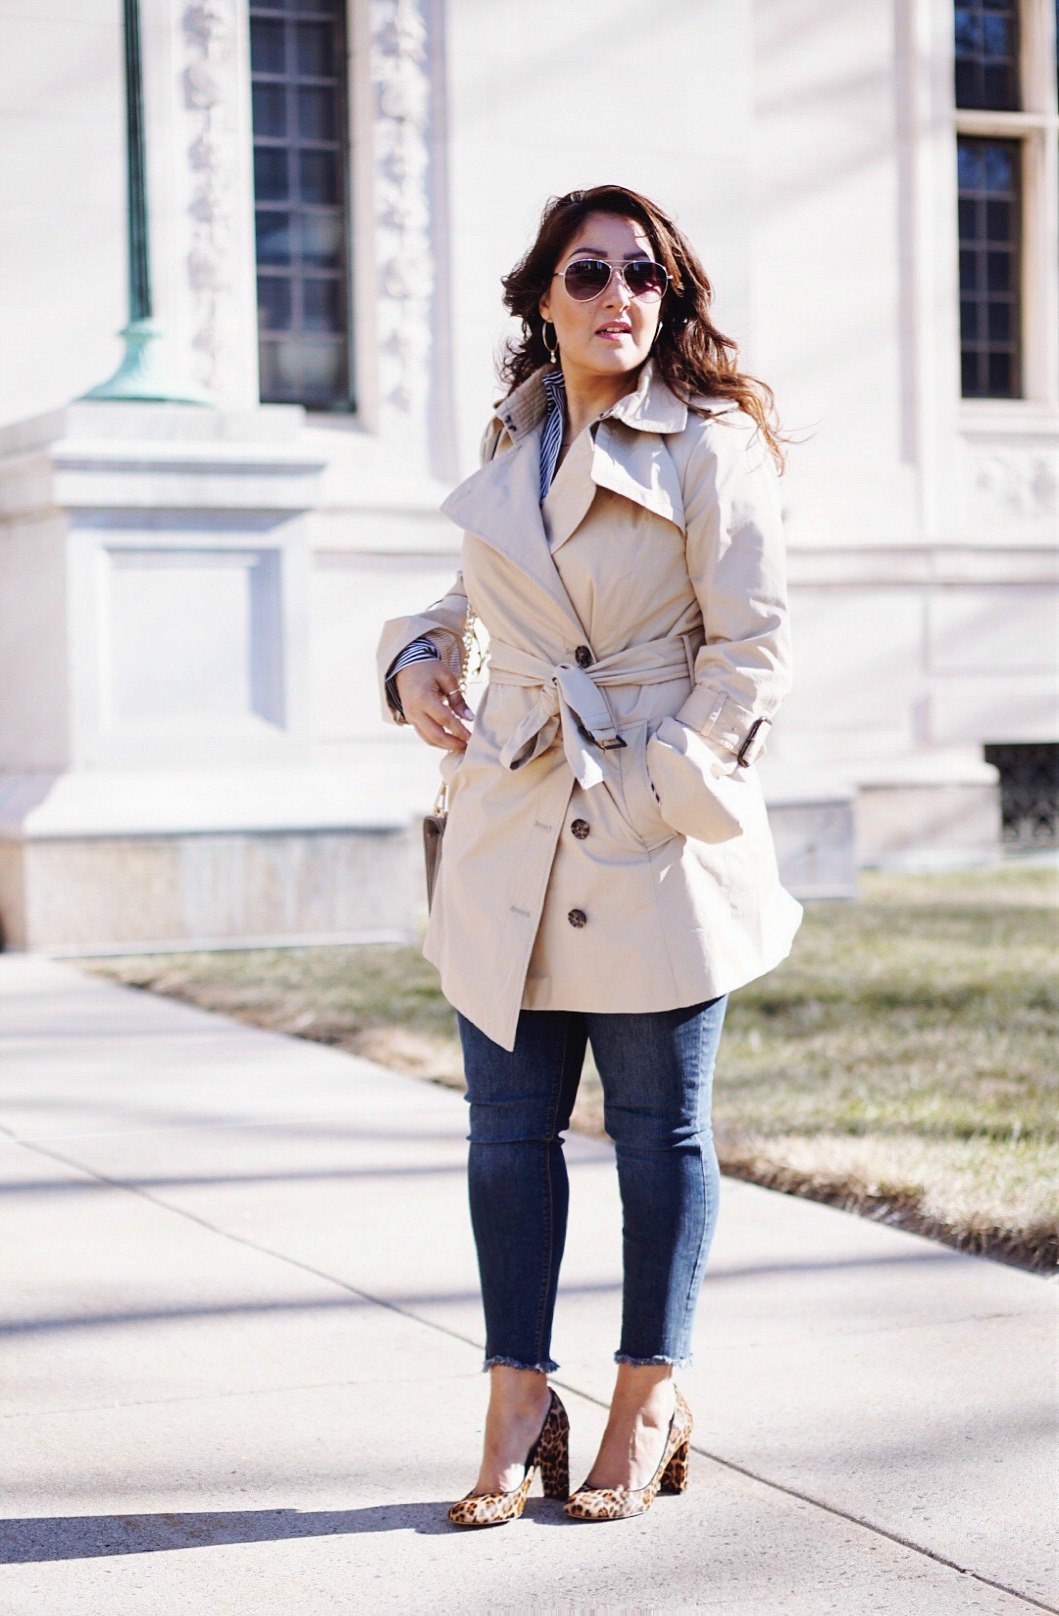 A casual way to style the trench coat.